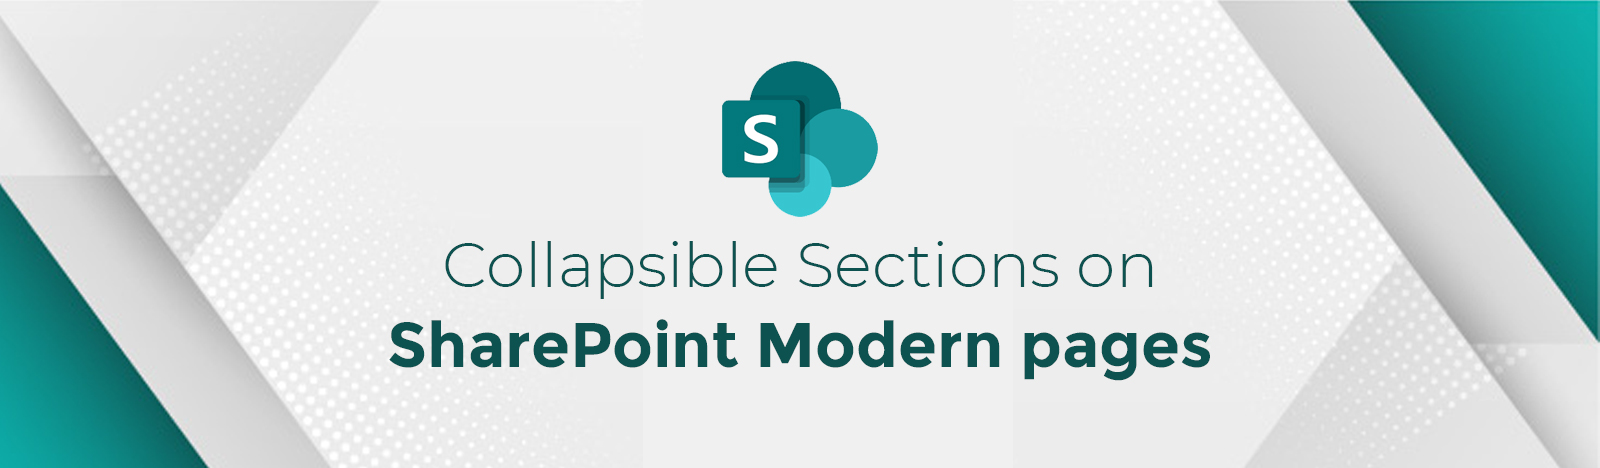 Collapsible Sections on SharePoint Modern pages